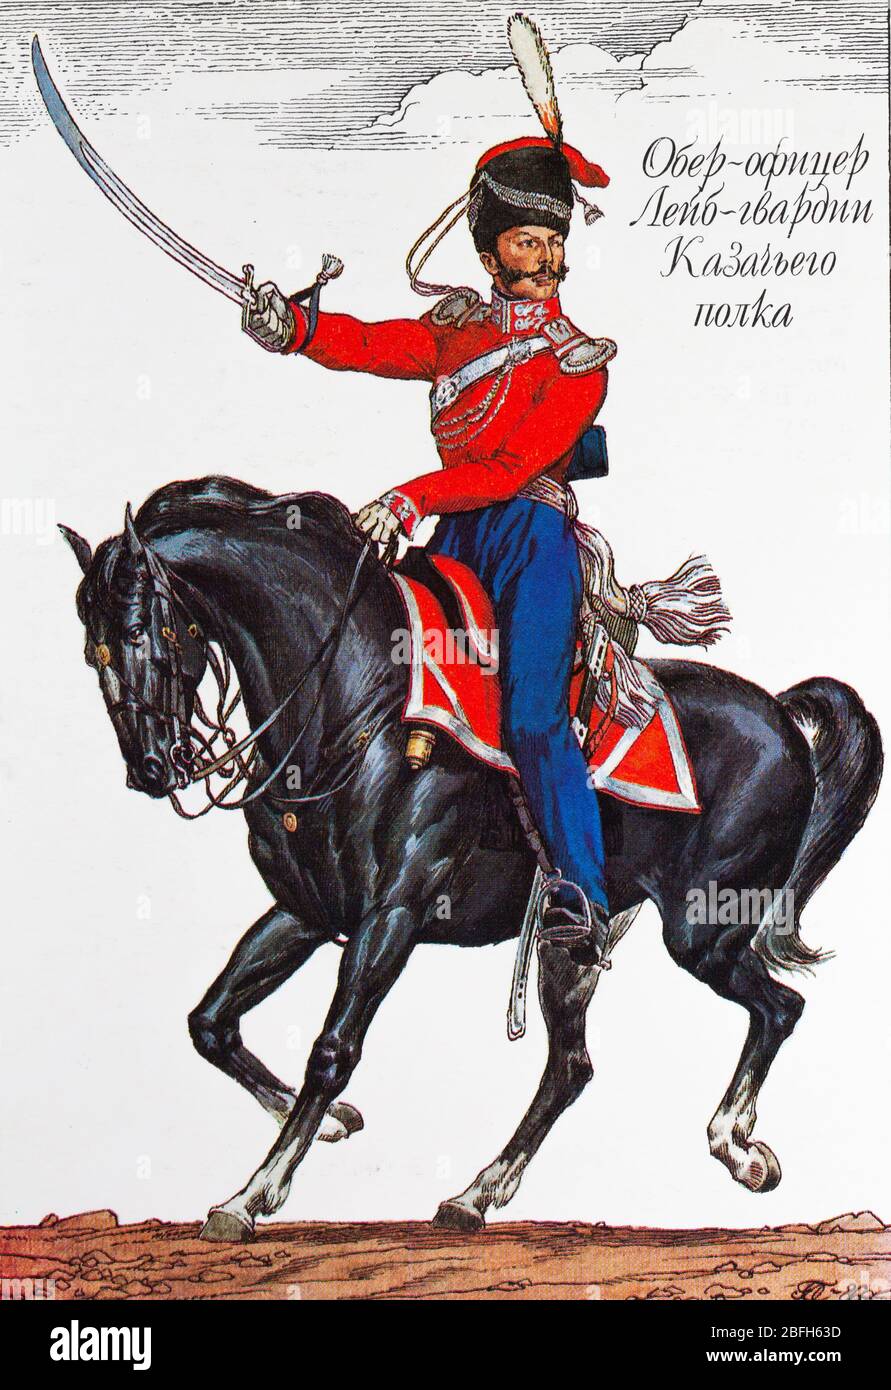 Imperial Guard cossack cavalry regiment petty officer,1812, 19th century Russian army uniform, Russia Stock Photo